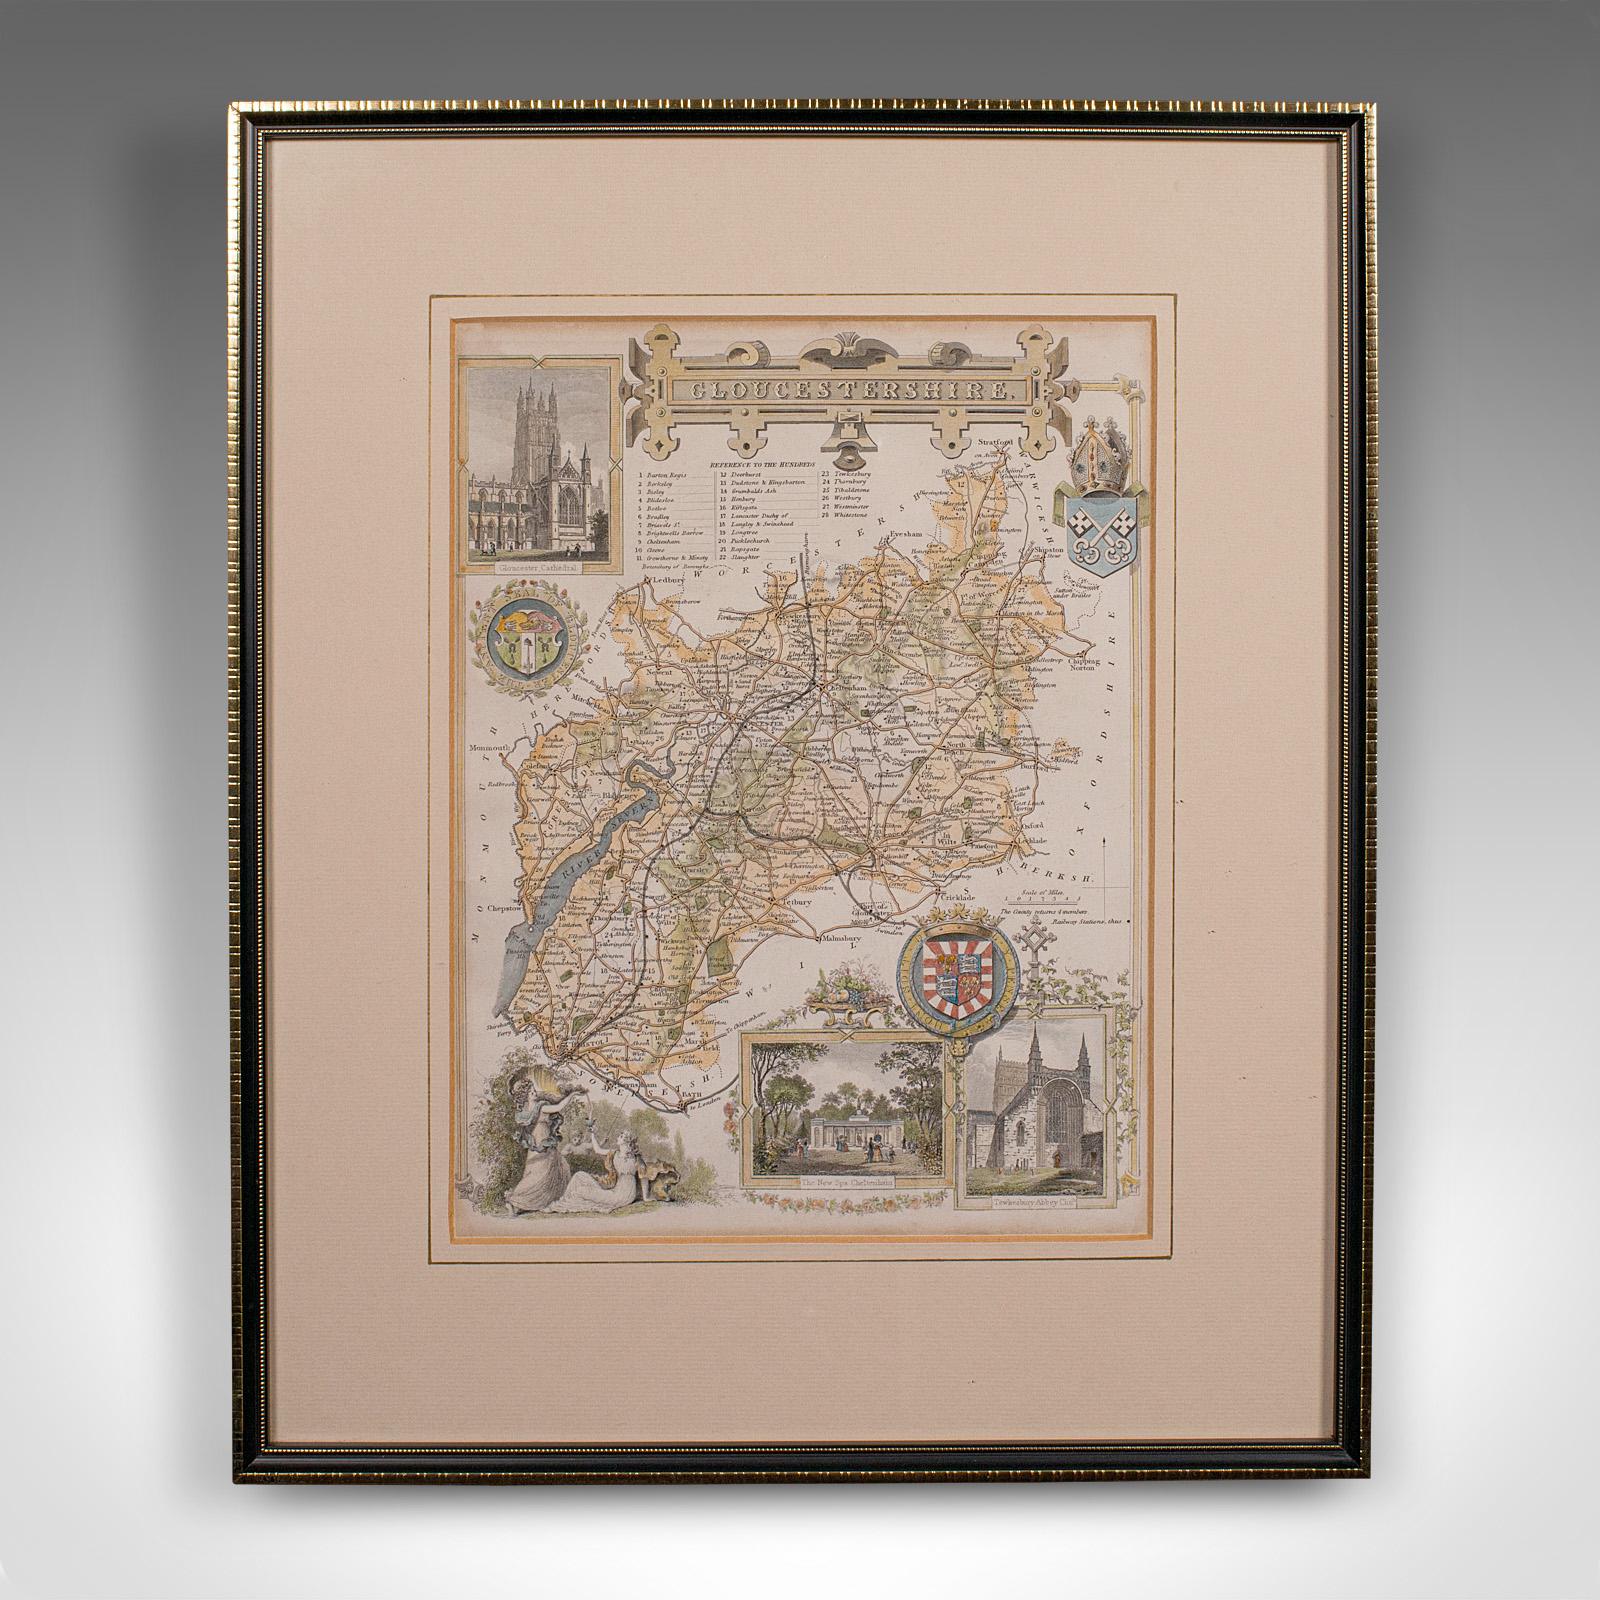 This is an antique lithography map of Gloucestershire. An English, framed atlas engraving of cartographic interest, dating to the mid 19th century and later.

Superb lithography of Gloucestershire and its county detail, perfect for